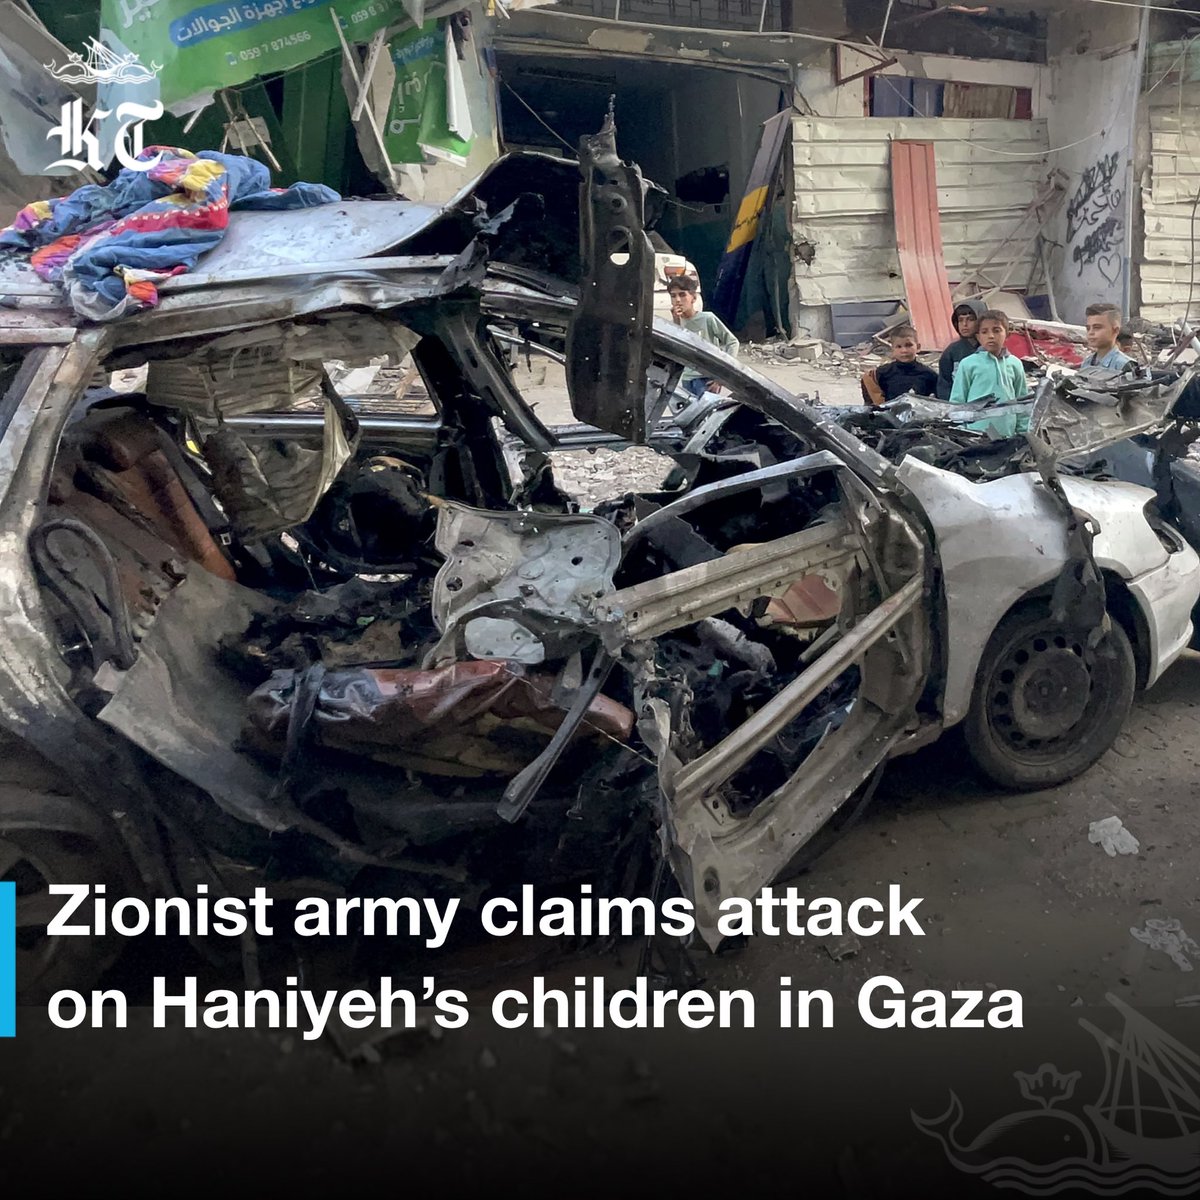 Zionist army spokesperson Daniel Hagari said fighter jets attacked “three military operatives” in central Gaza, referring to a car carrying Haniyeh’s children, who were killed earlier Wednesday. He identified the three as Amir, Hazem and Mohammad Haniyeh, Al-Jazeera reported.…